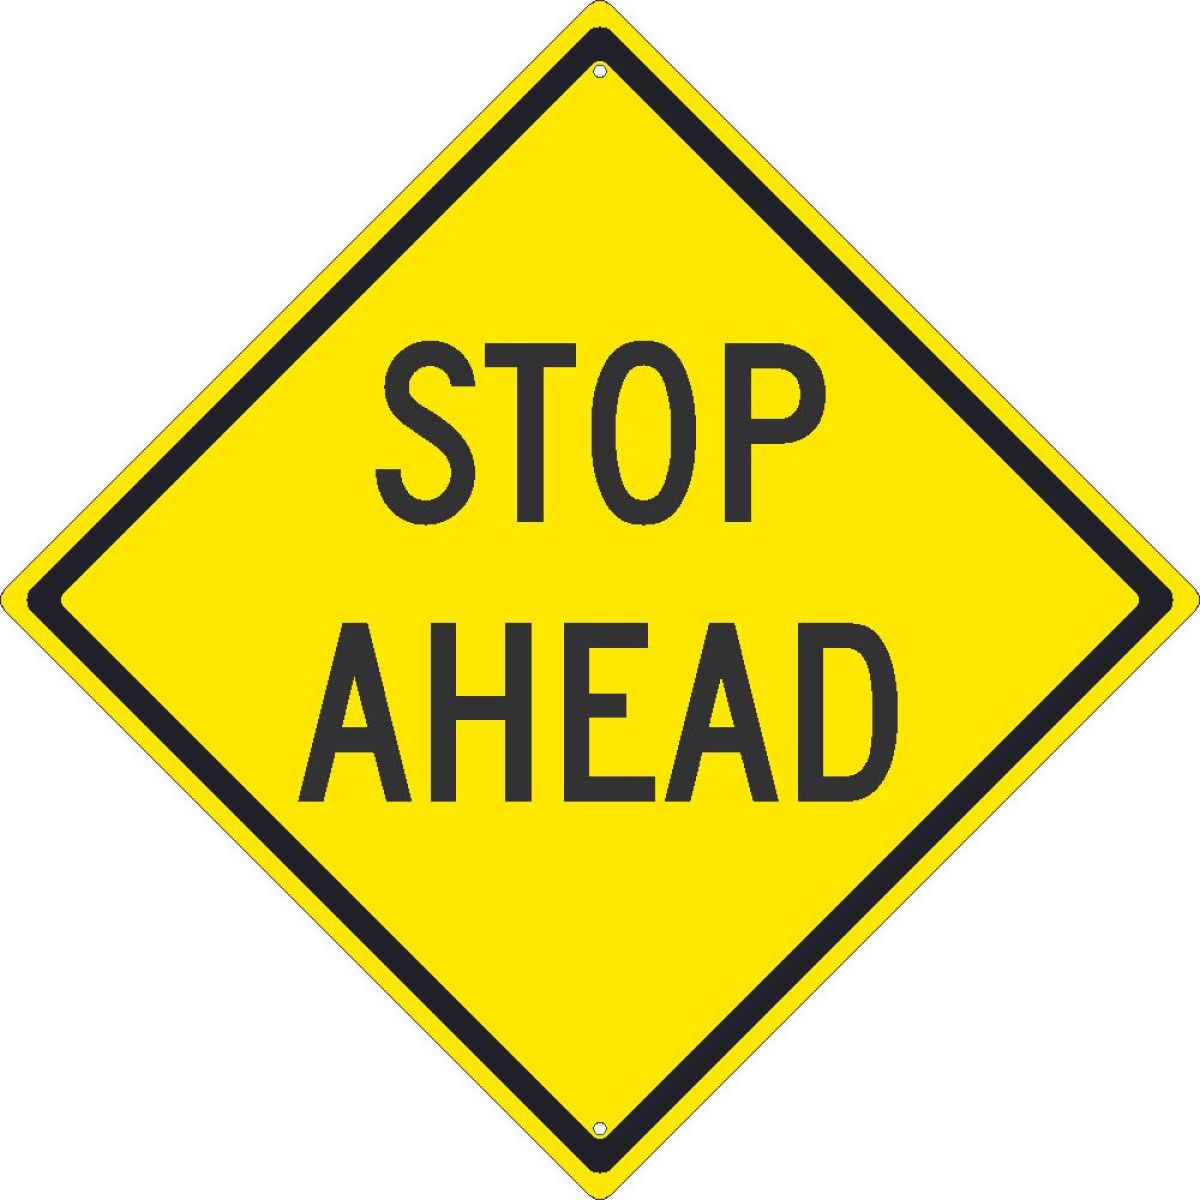 STOP AHEAD SIGN